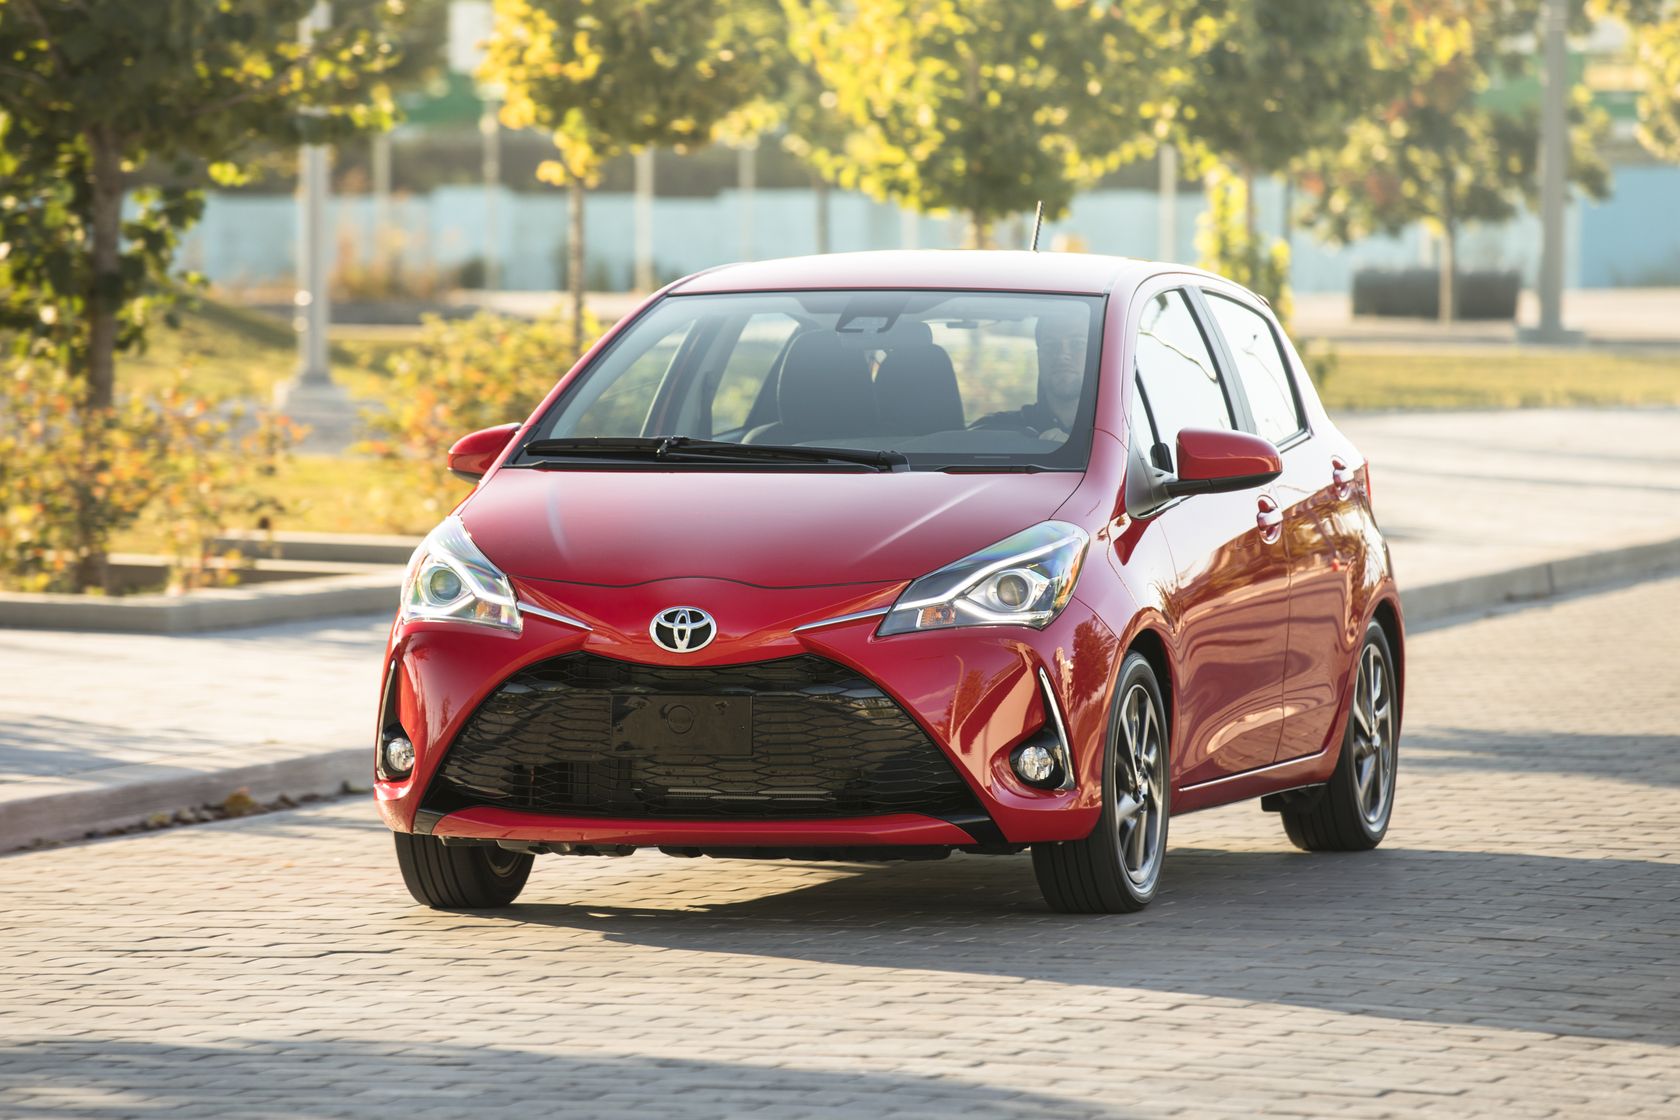 2019 Toyota Yaris Hatchback Review